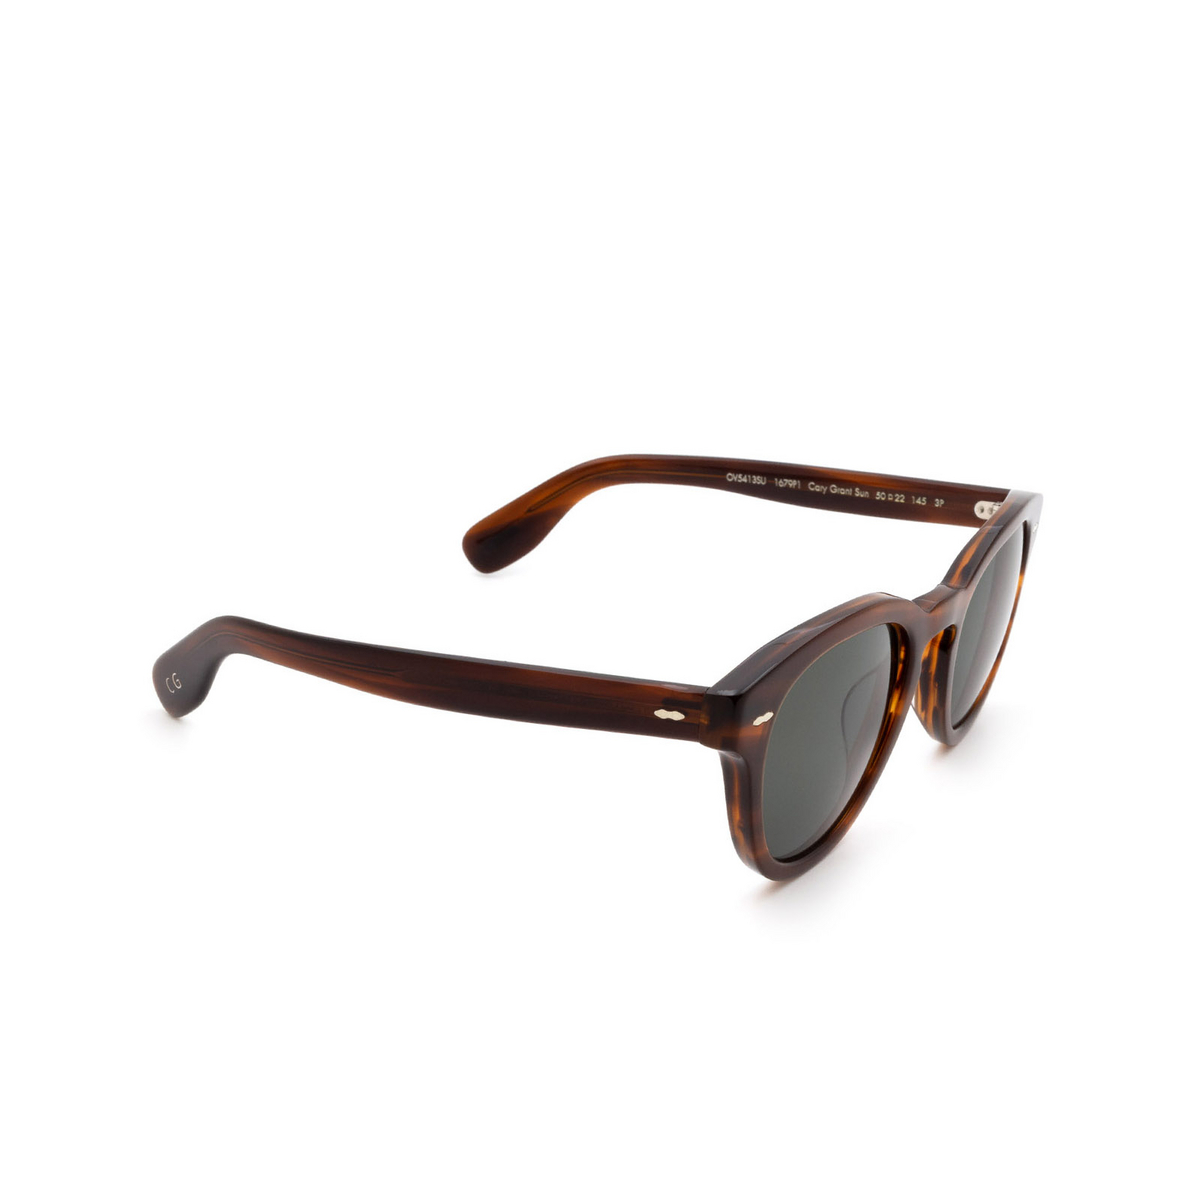 Oliver Peoples® Sunglasses: Cary Grant Sun OV5413SU color Grant Tortoise 1679P1 - front view.